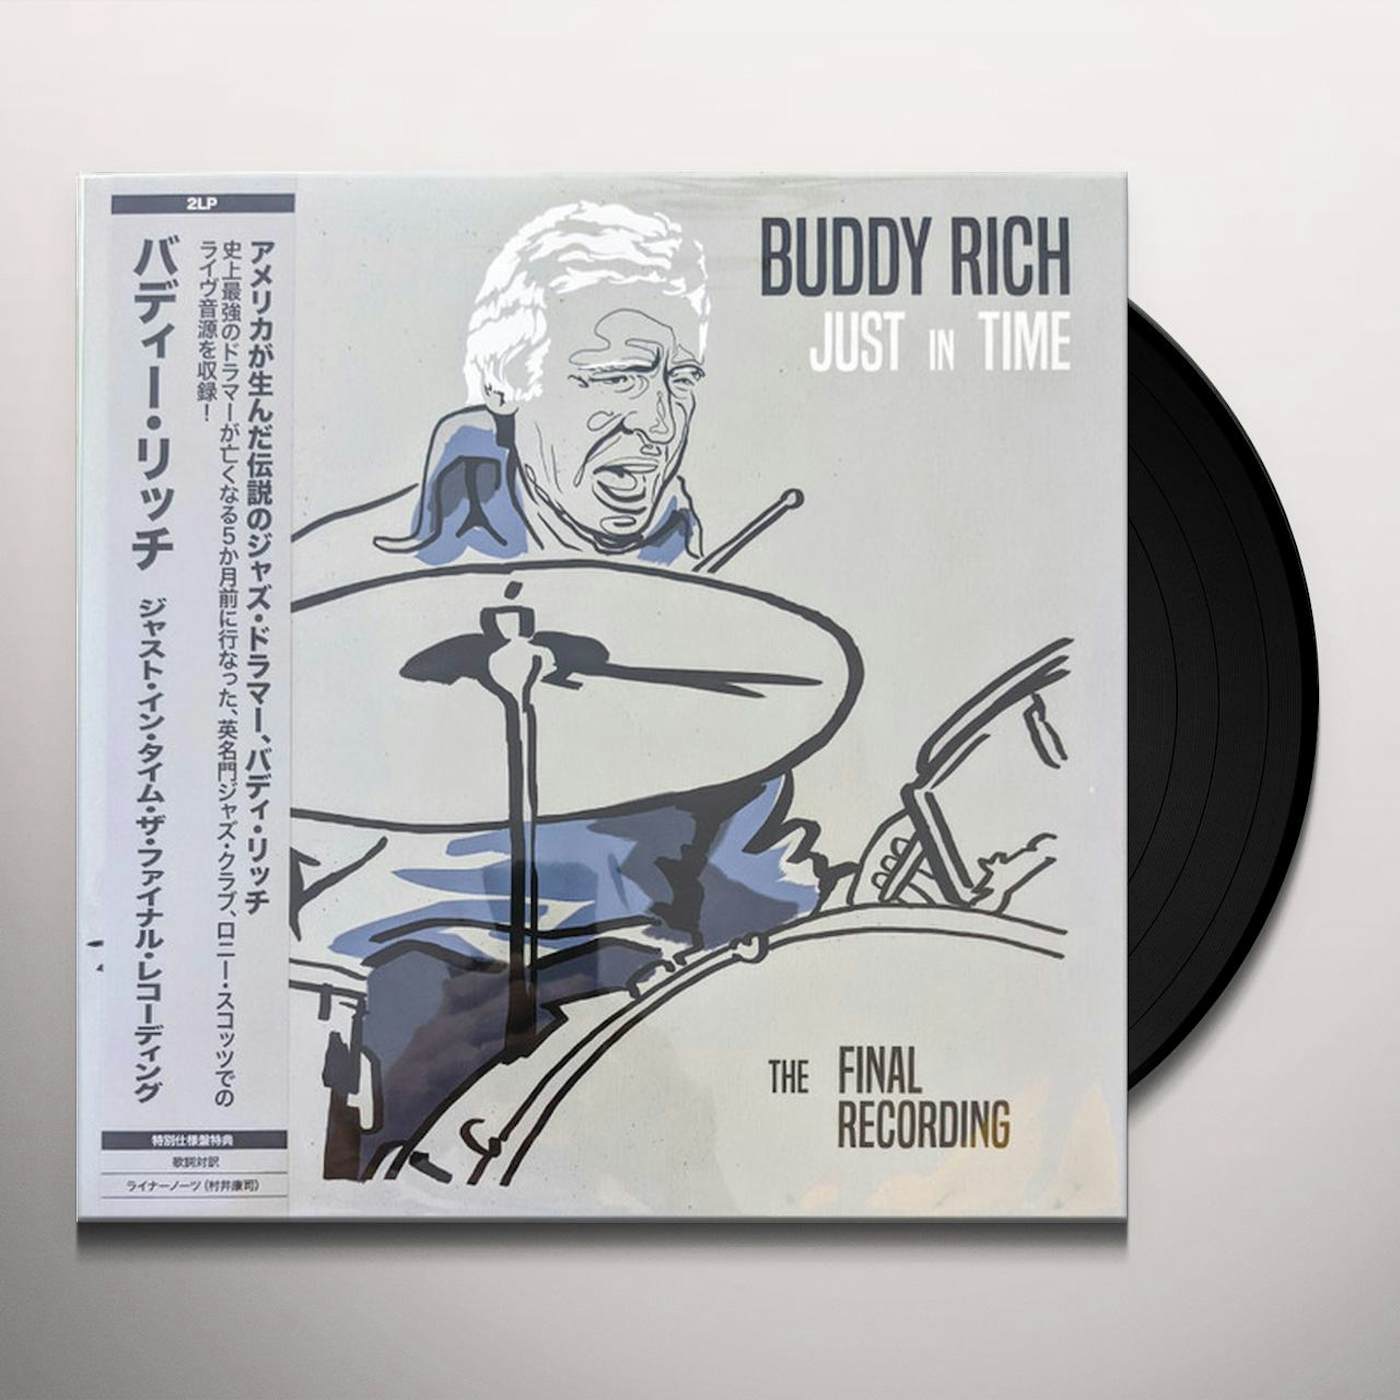 Buddy Rich JUST IN TIME - THE FINAL RECORDING (I) Vinyl Record